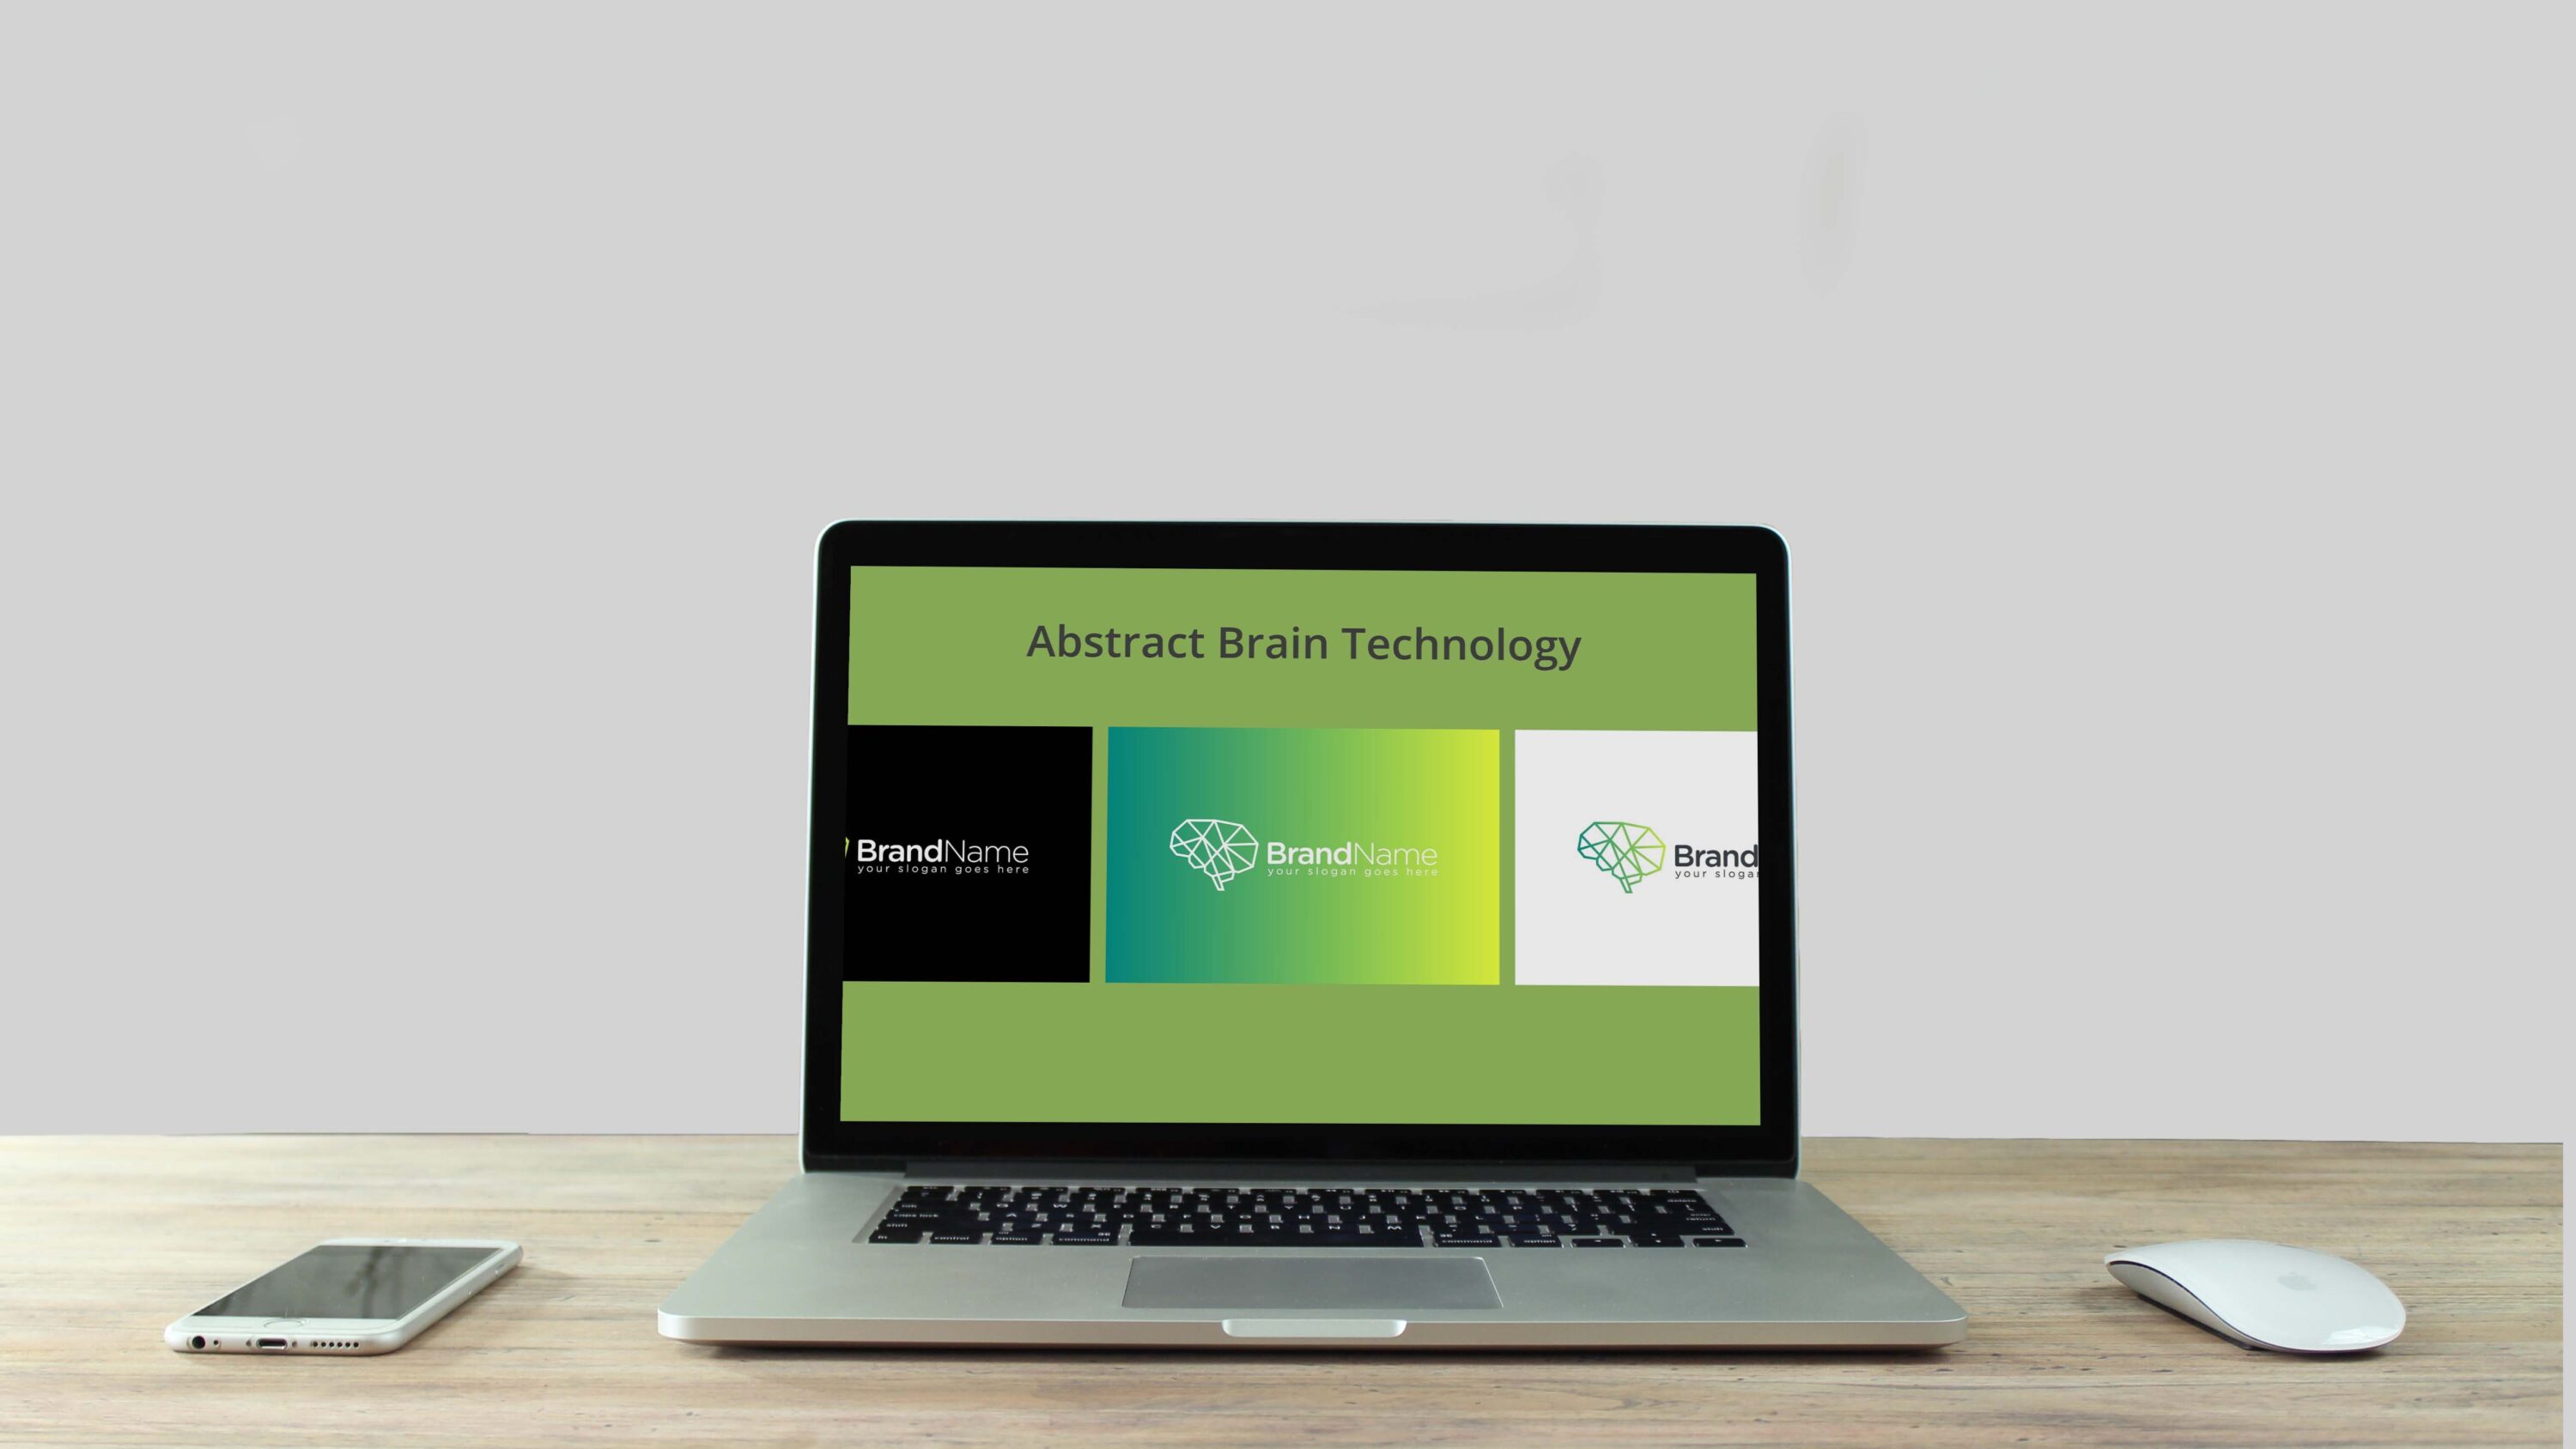 Abstract Brain Technology laptop preview.